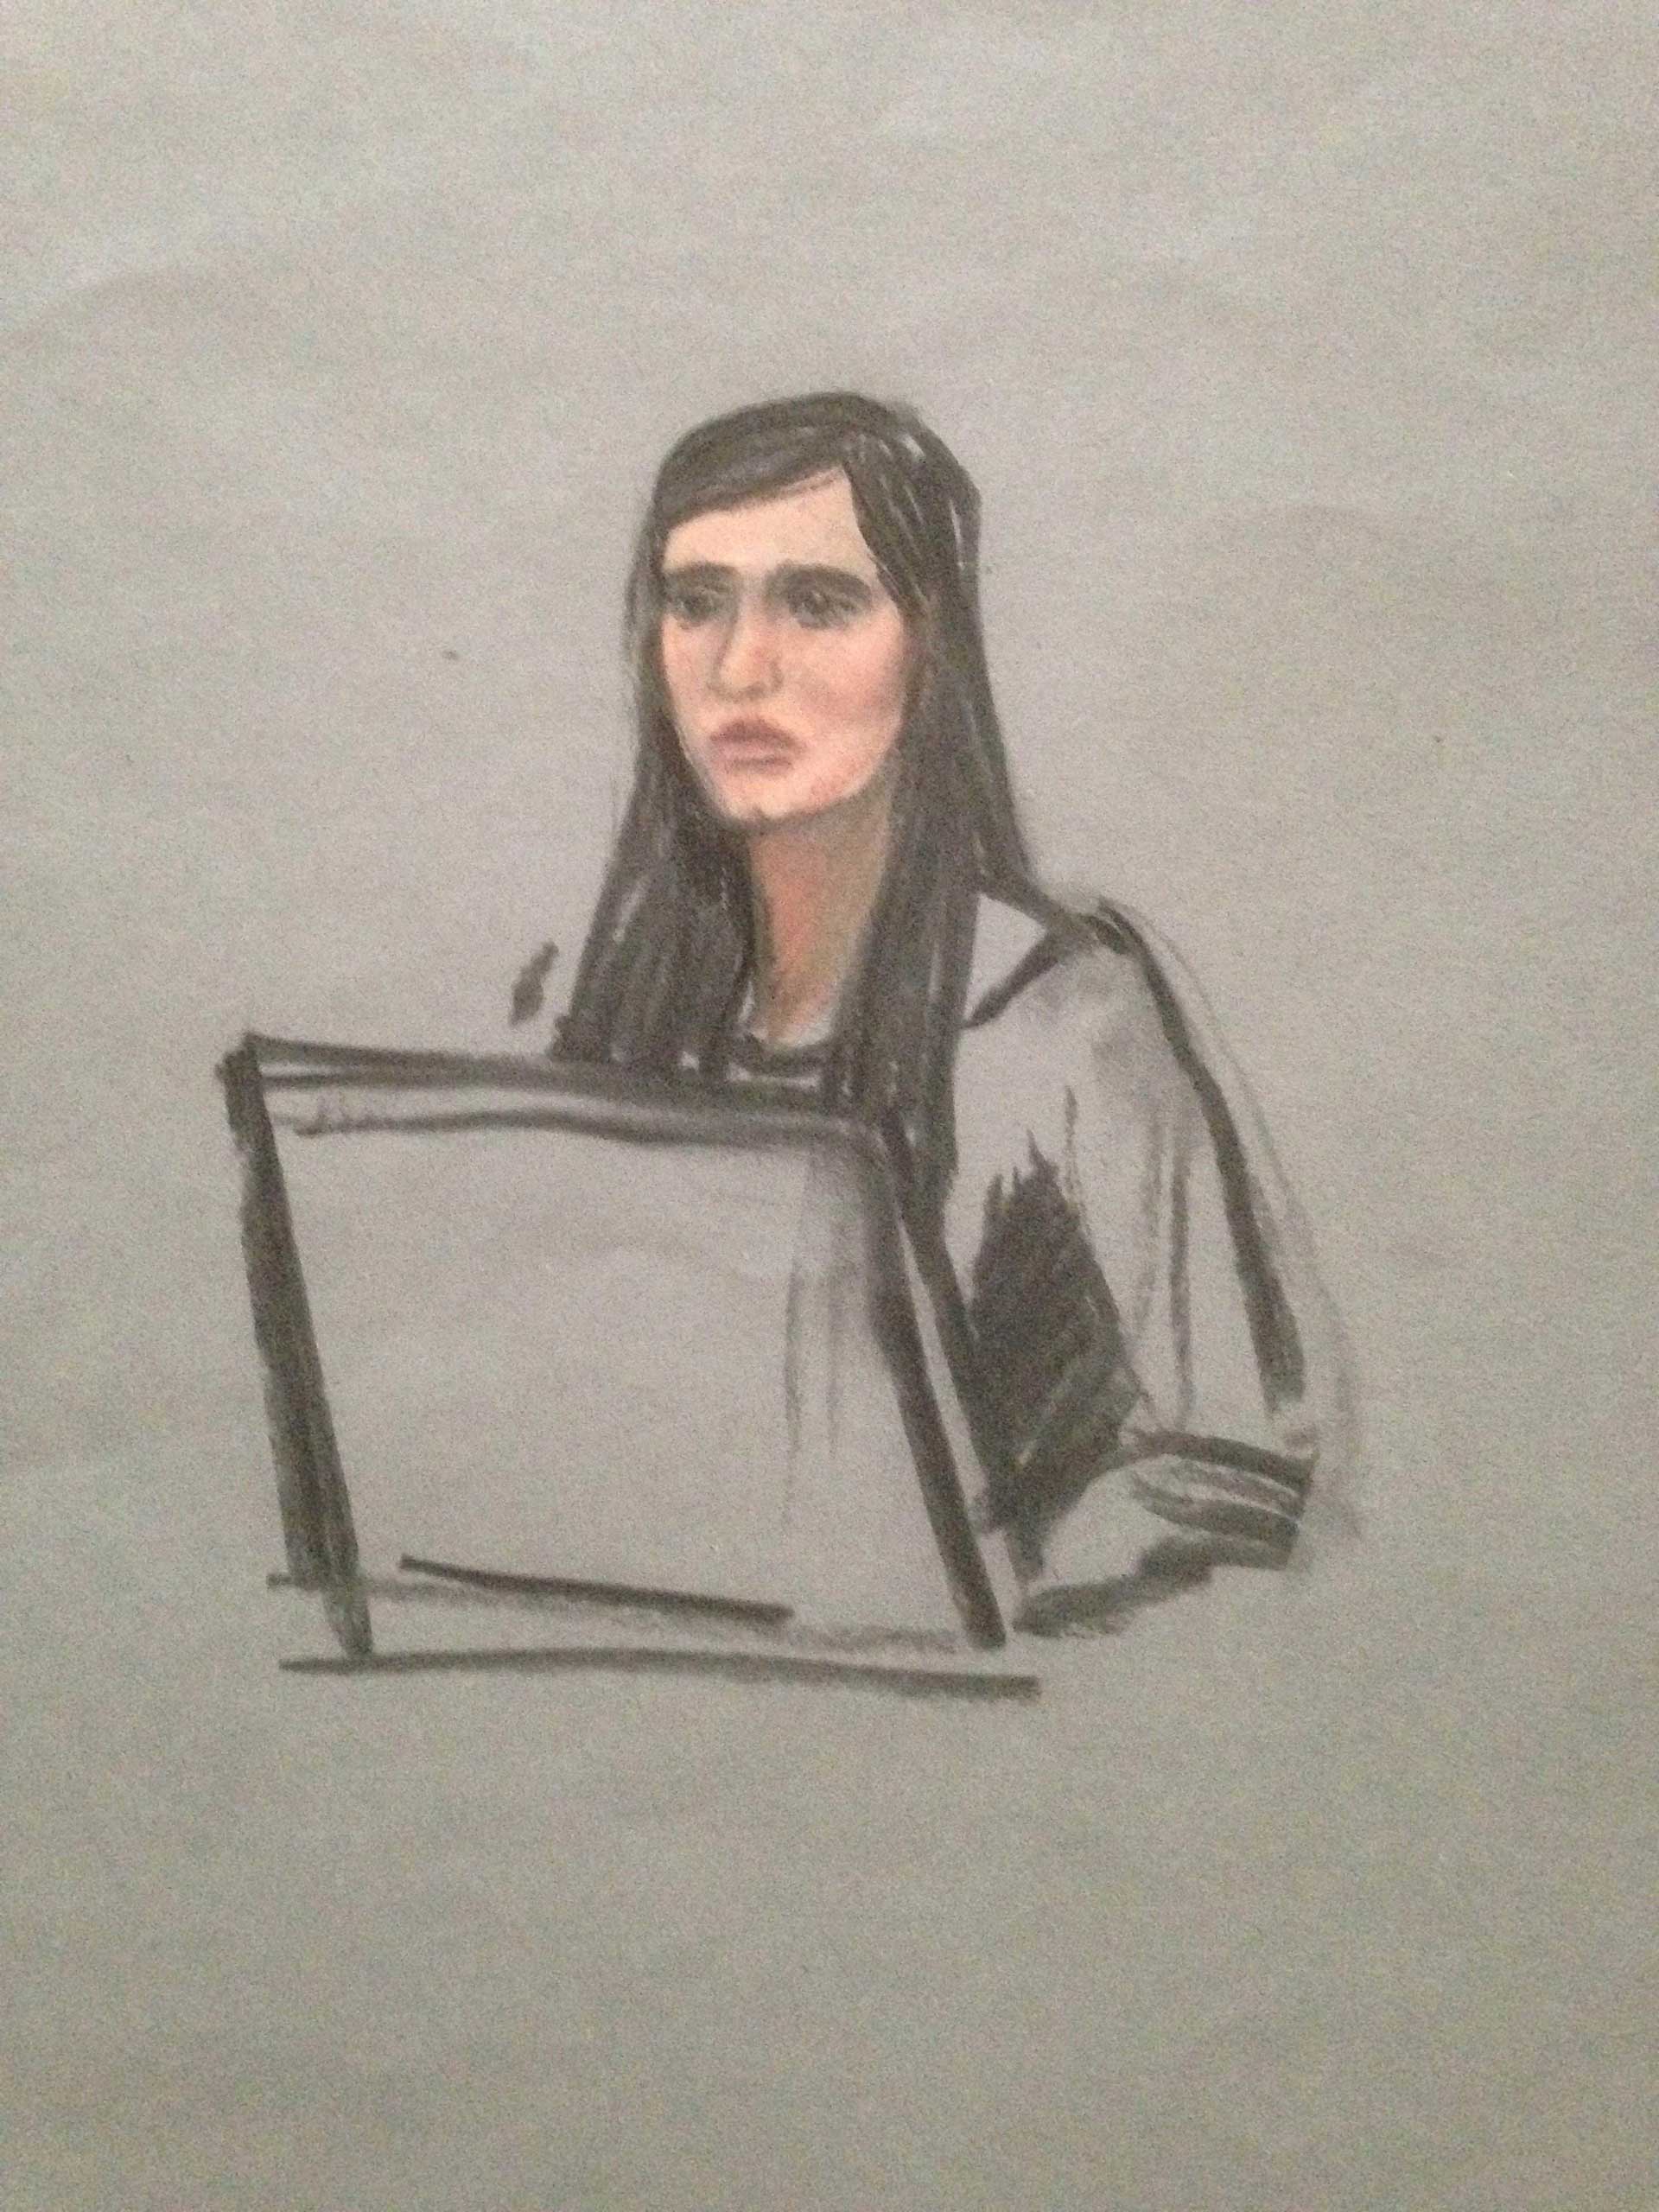 A courtroom sketch shows Boston Marathon bombing survivor Sydney Corcoran testifying in the trial of accused bomber Dzhokhar Tsarnaev at the federal courthouse in Boston, Mass., March 4, 2015.